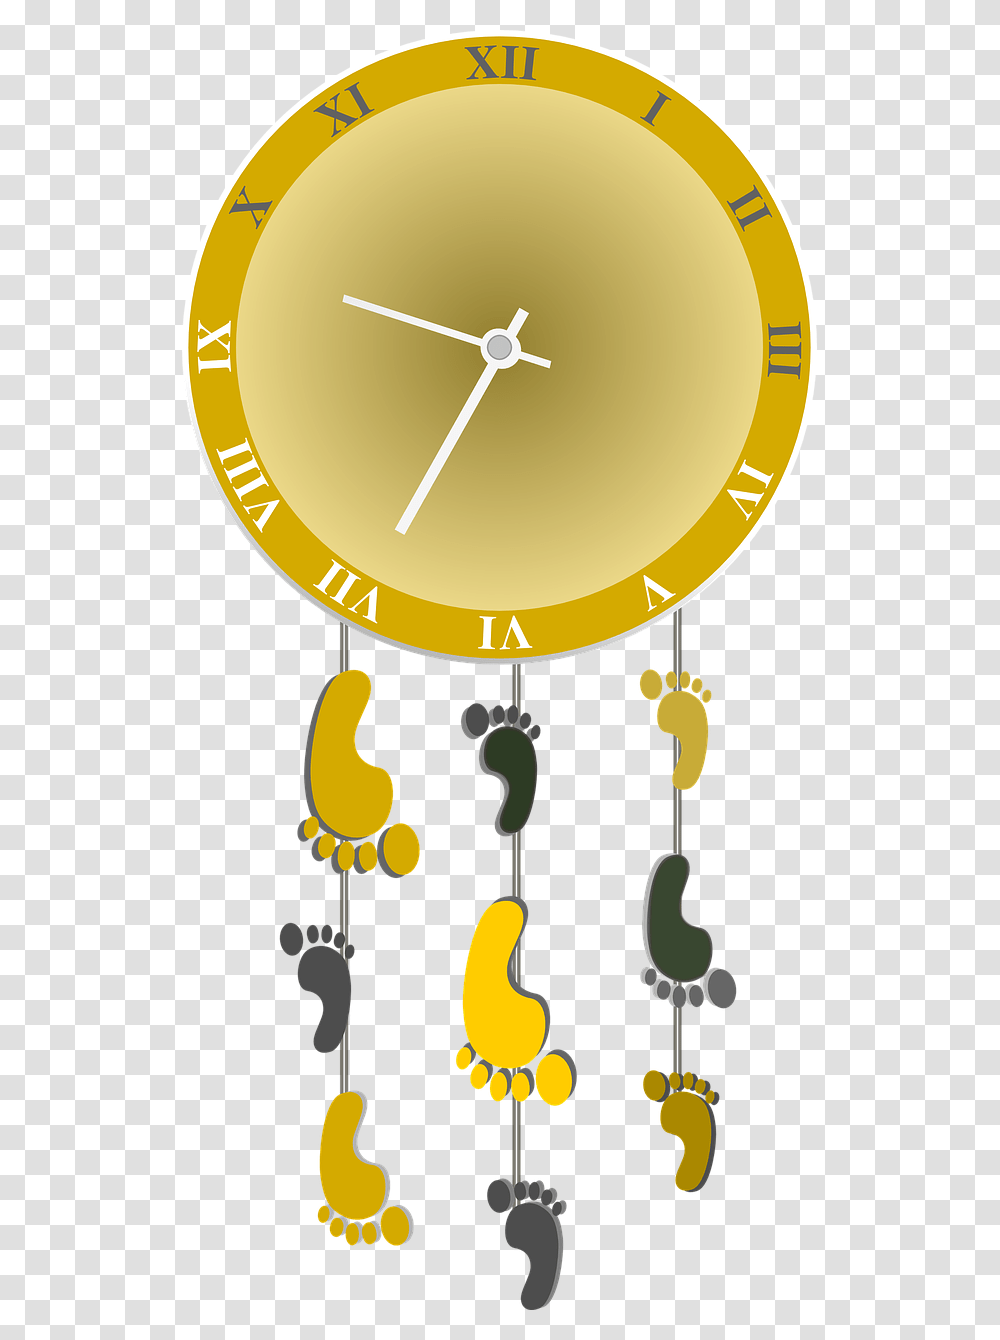 Pictures Free Photos Free Images Royalty Free Free, Analog Clock, Lamp, Wall Clock Transparent Png